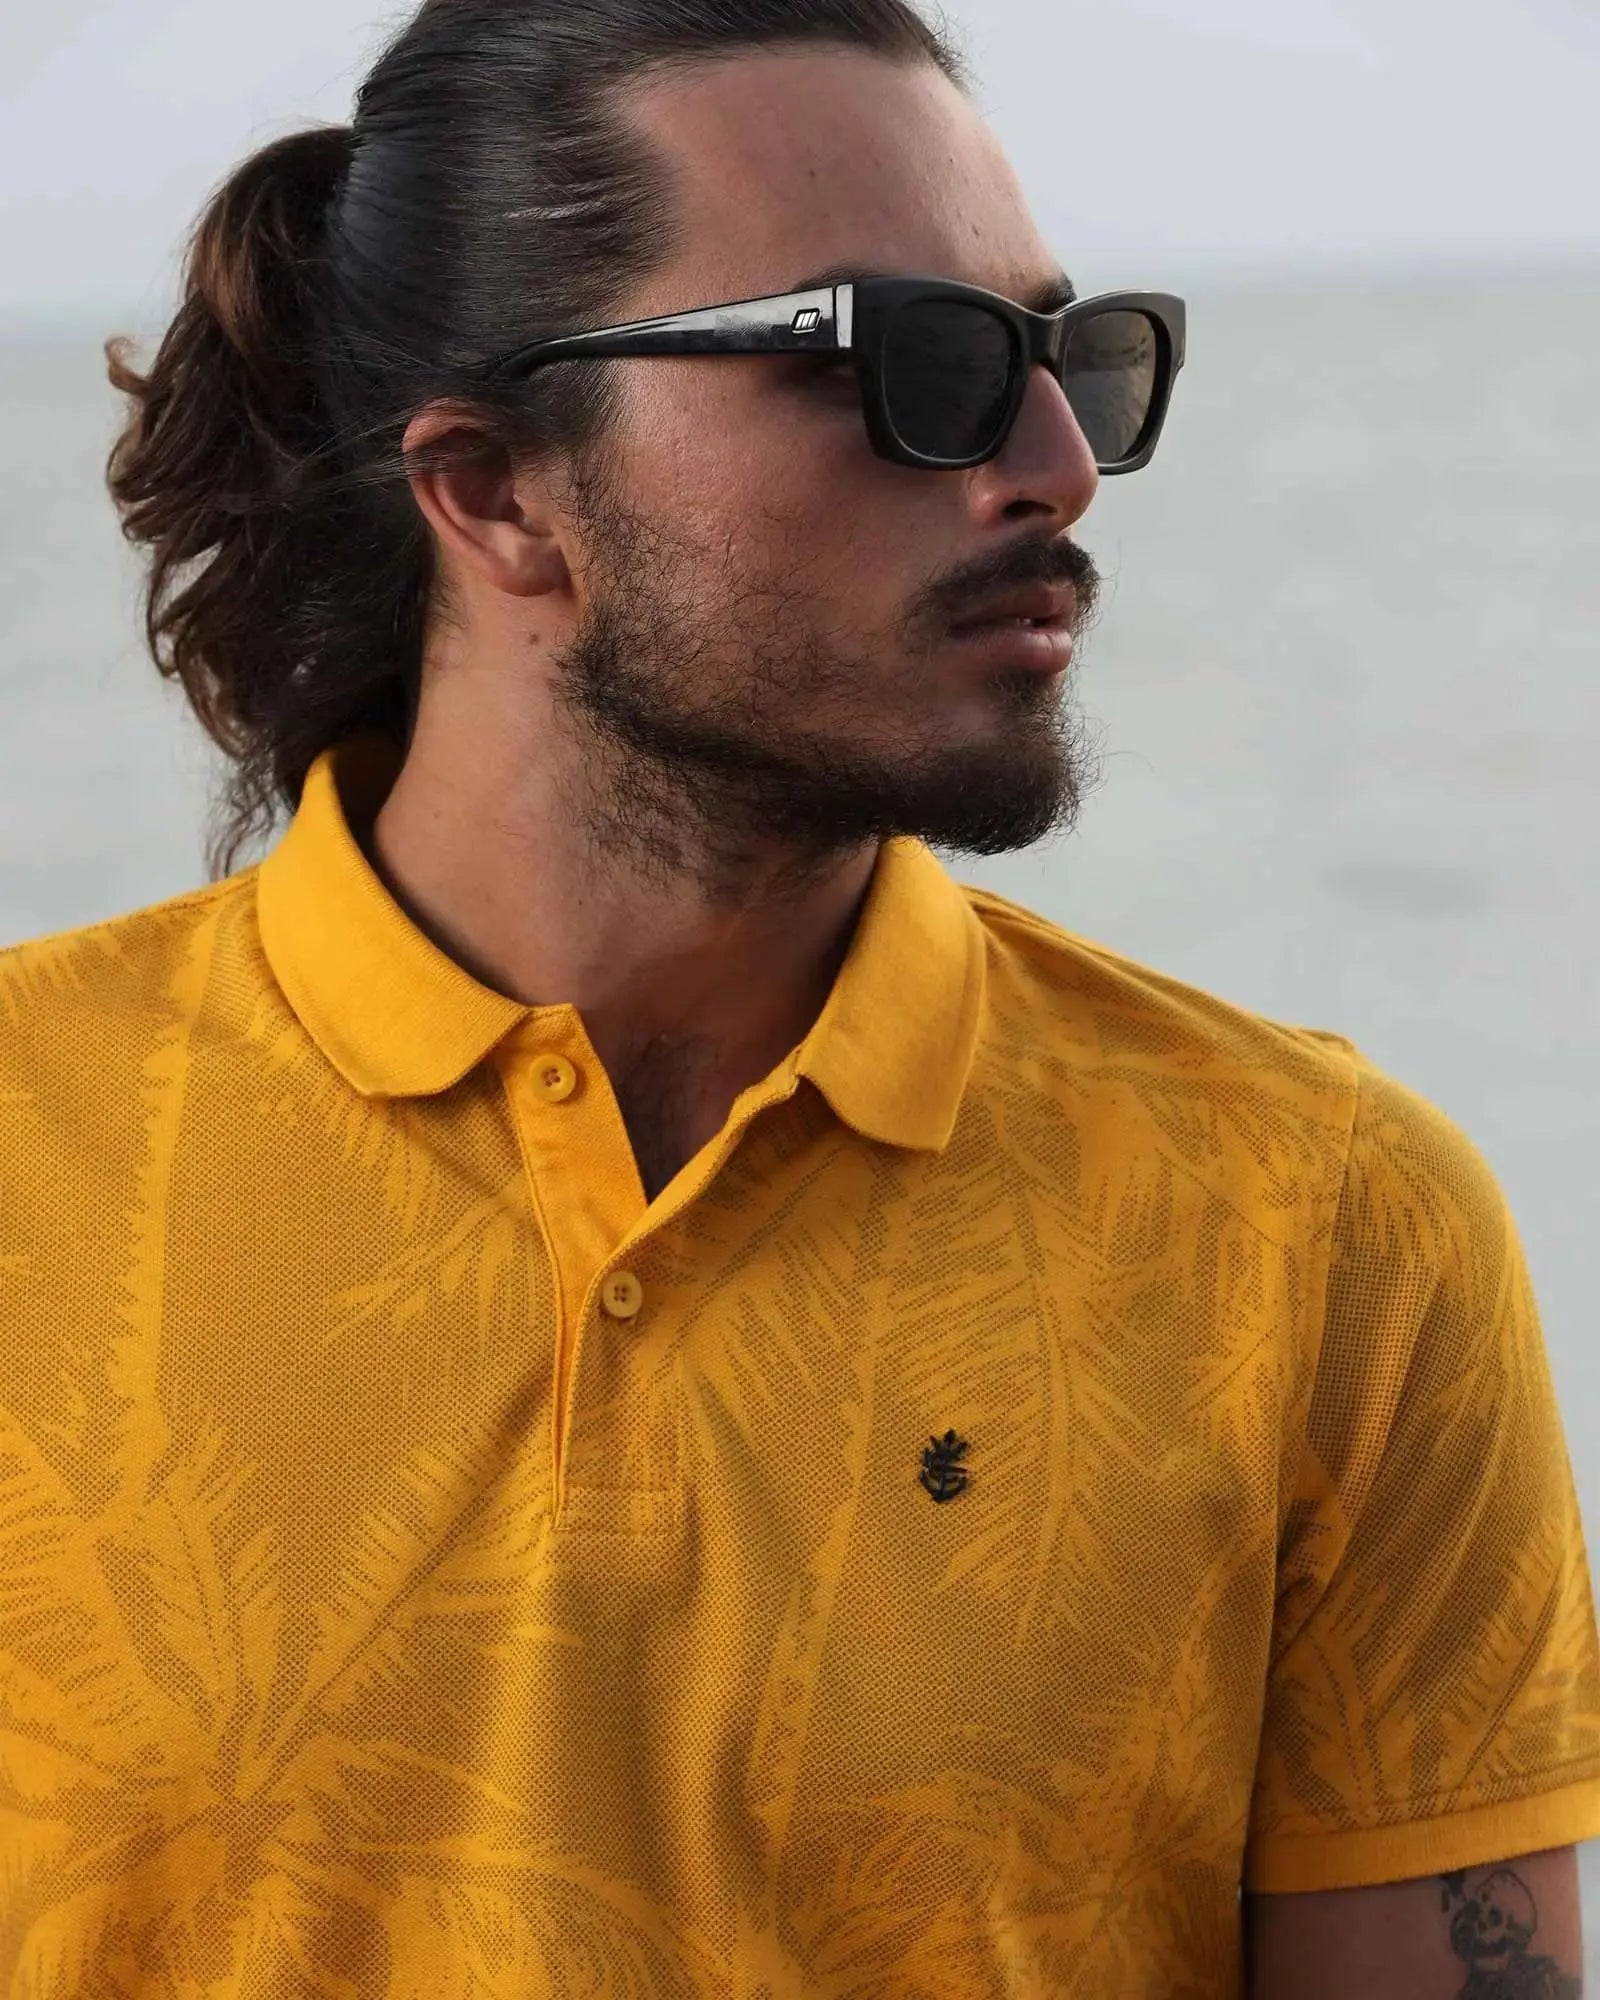 LCY London | Art of Summer - Printed Pique Men&#39;s Short Sleeved Polo Shirt LCY London